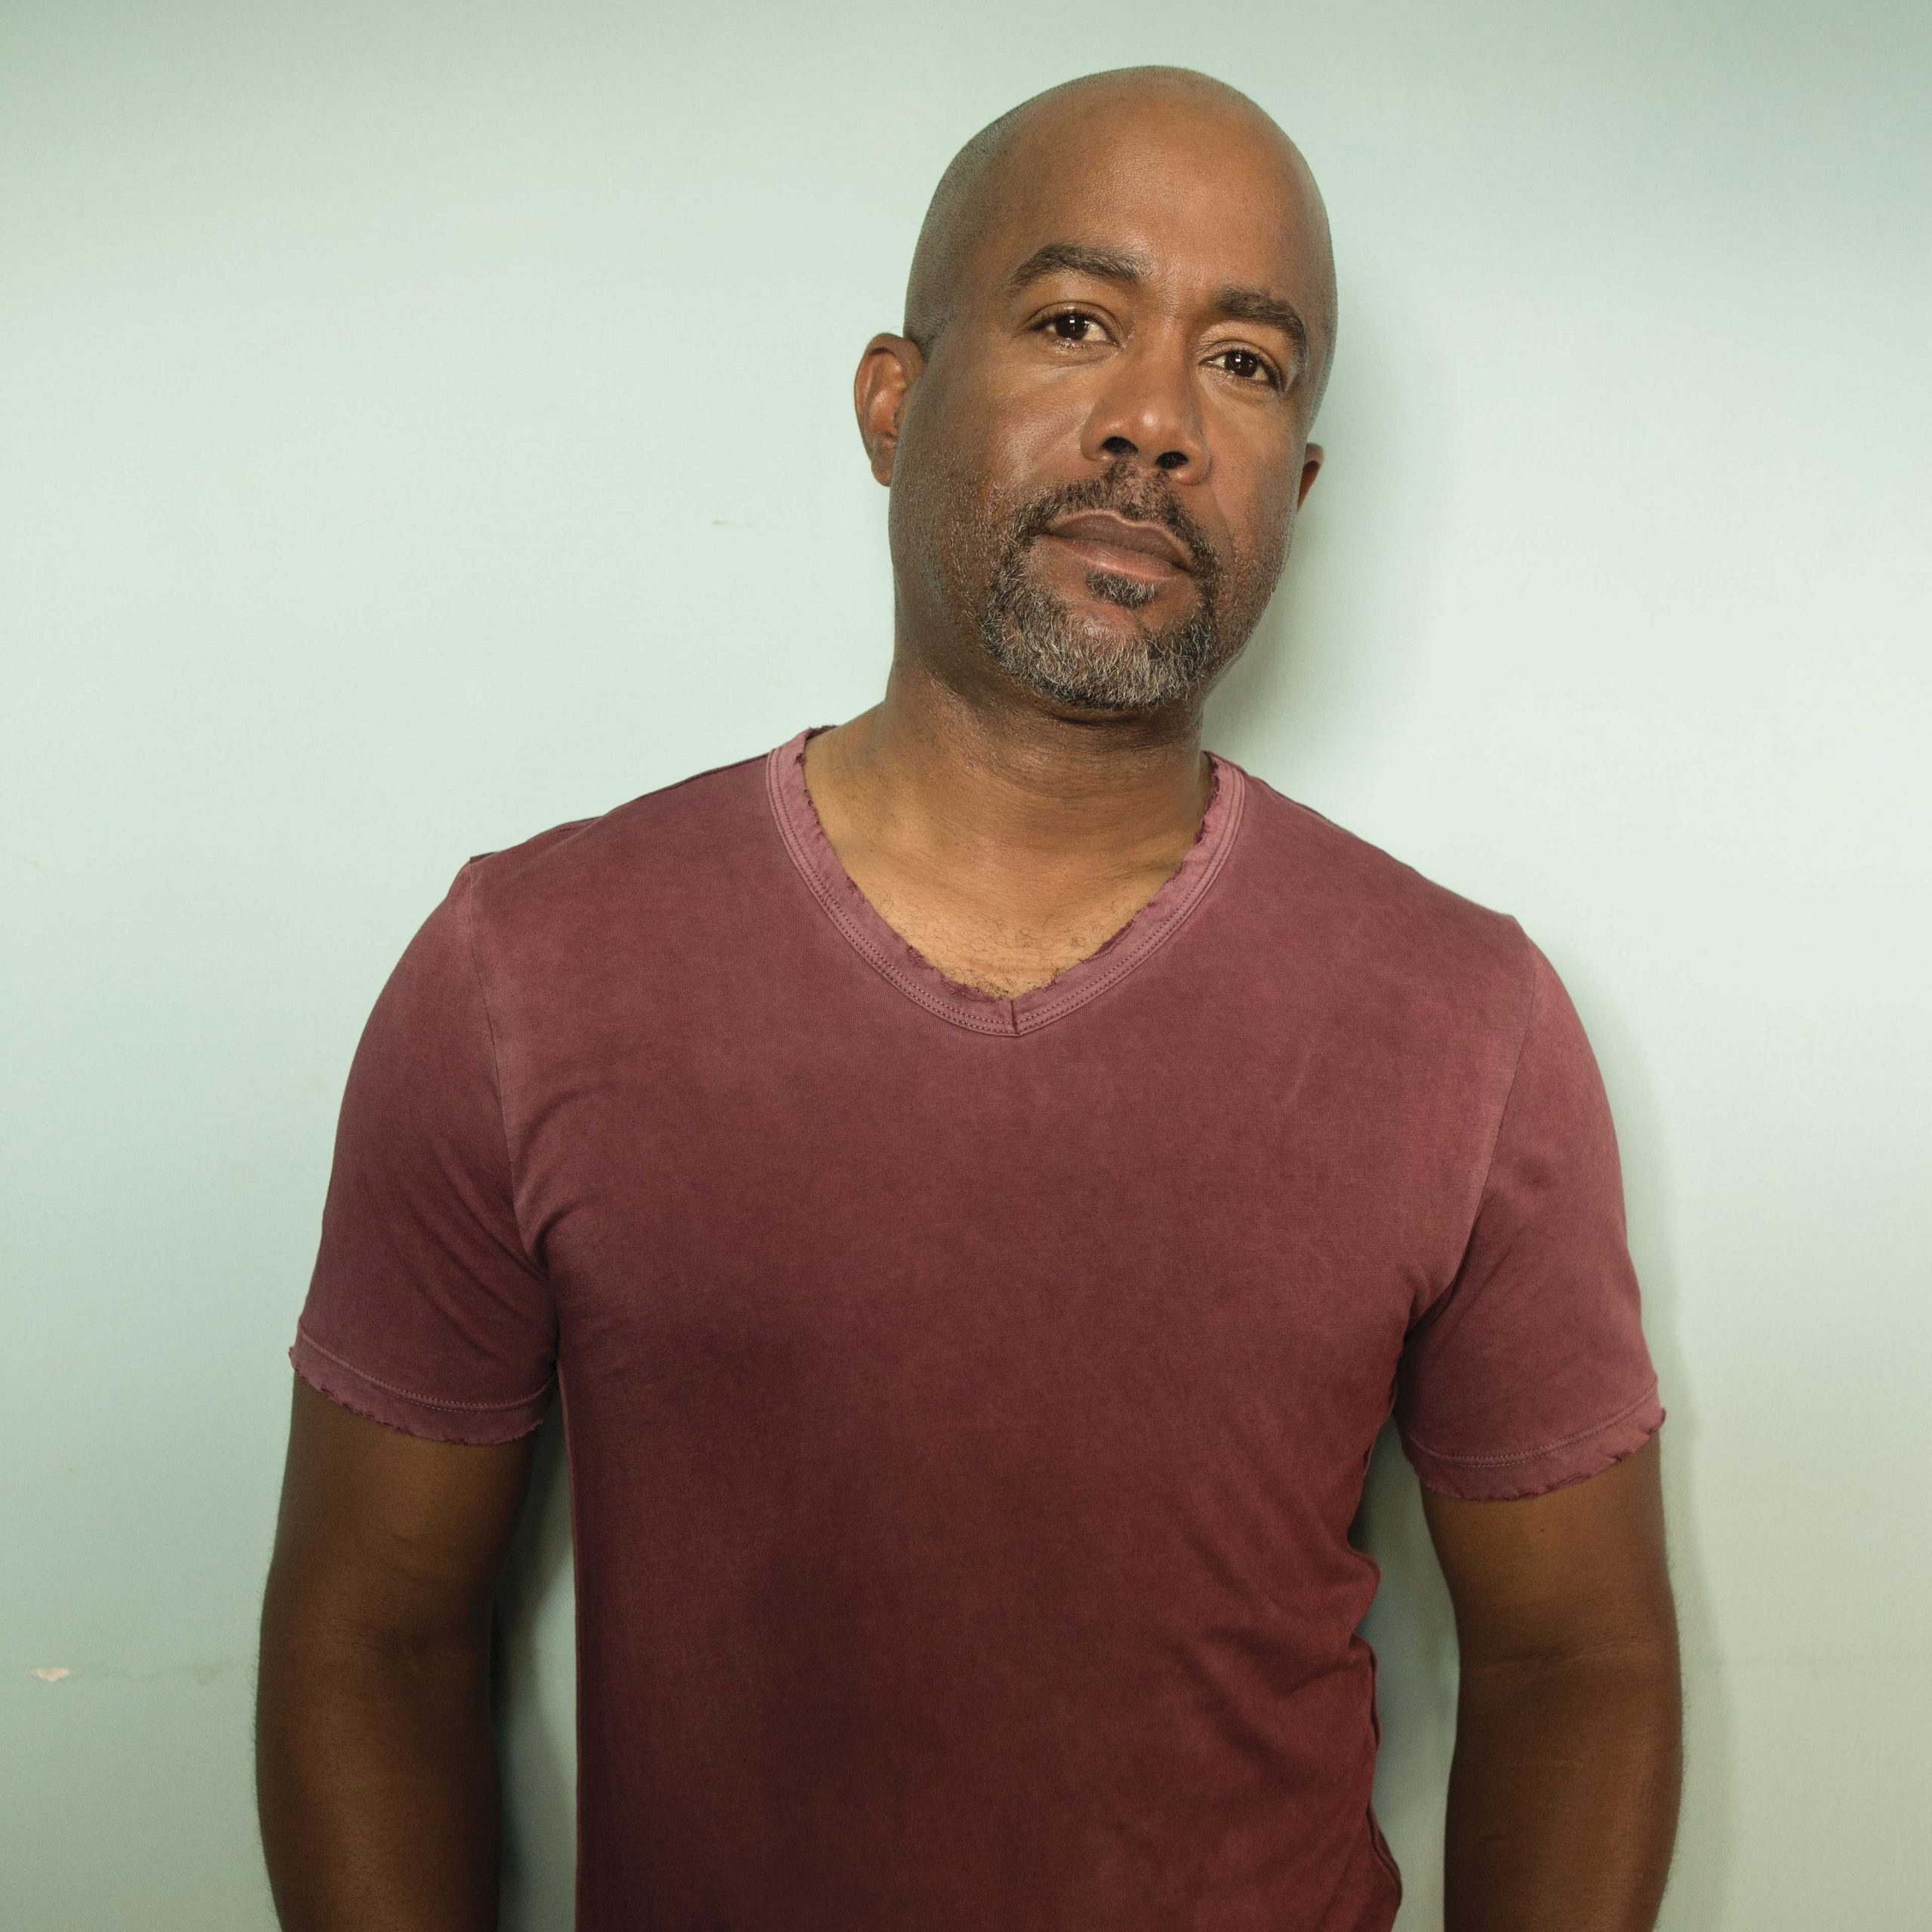 DARIUS RUCKER UNVEILS NEW MUSIC WITH TIMELY “SAME BEER DIFFERENT PROBLEM”